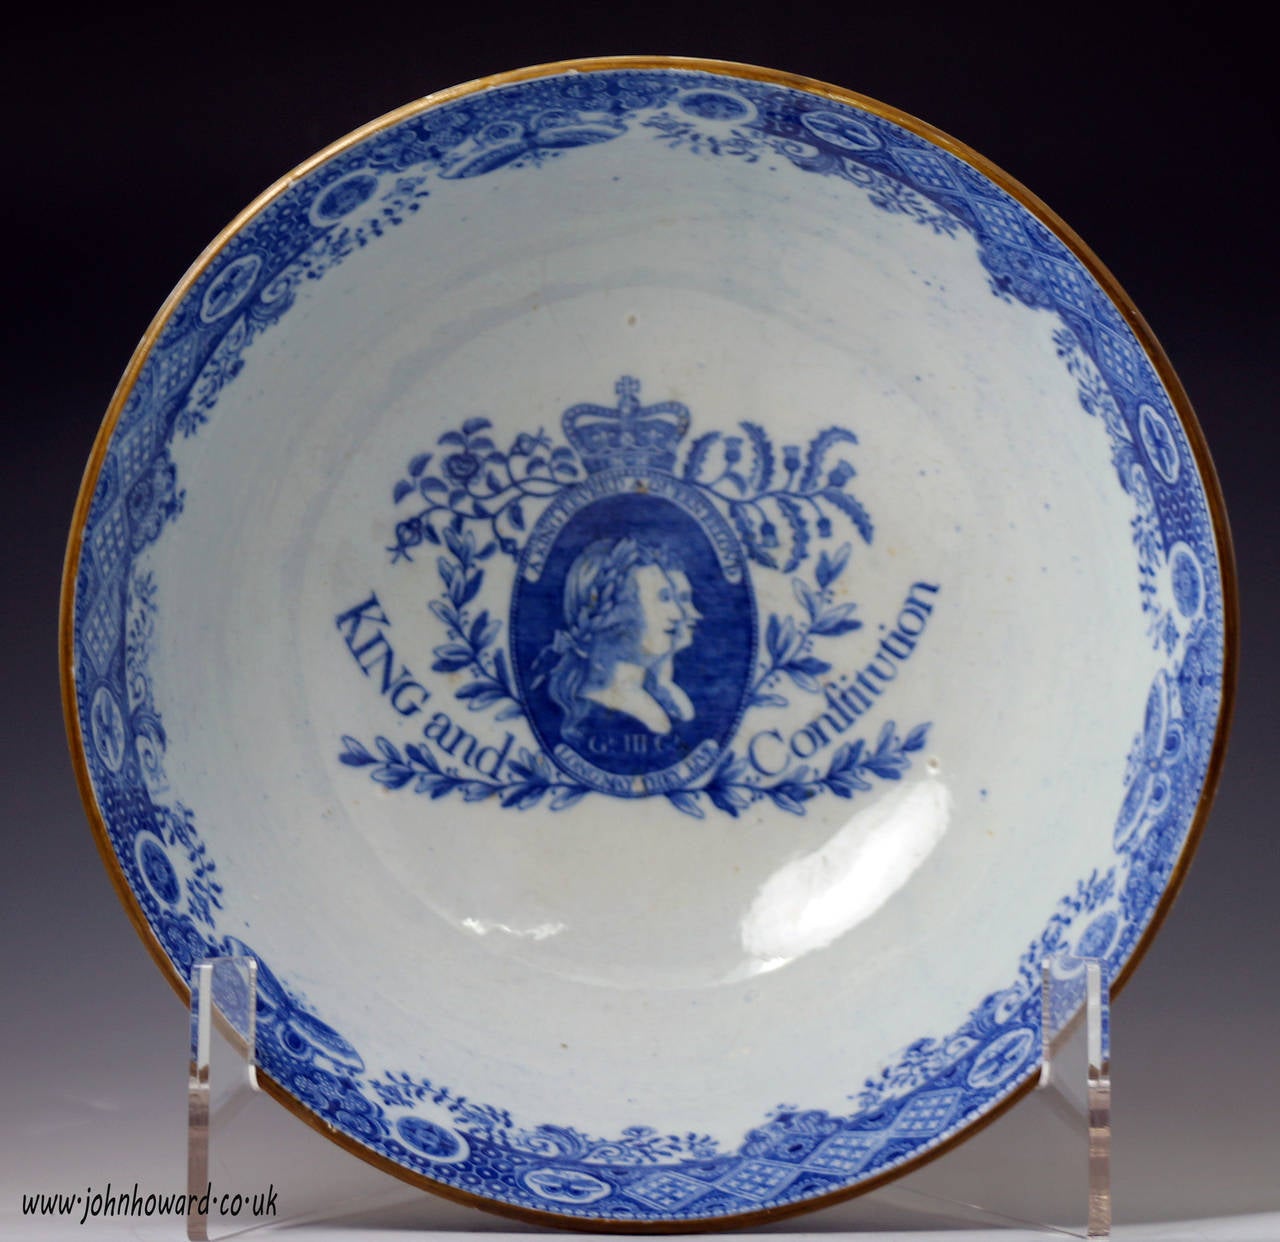 A fine pearlware pottery bowl commemorating King and Constitution with underglaze blue and white transfer prints of King George 111 and his Queen. The portraits are encircled with the script 